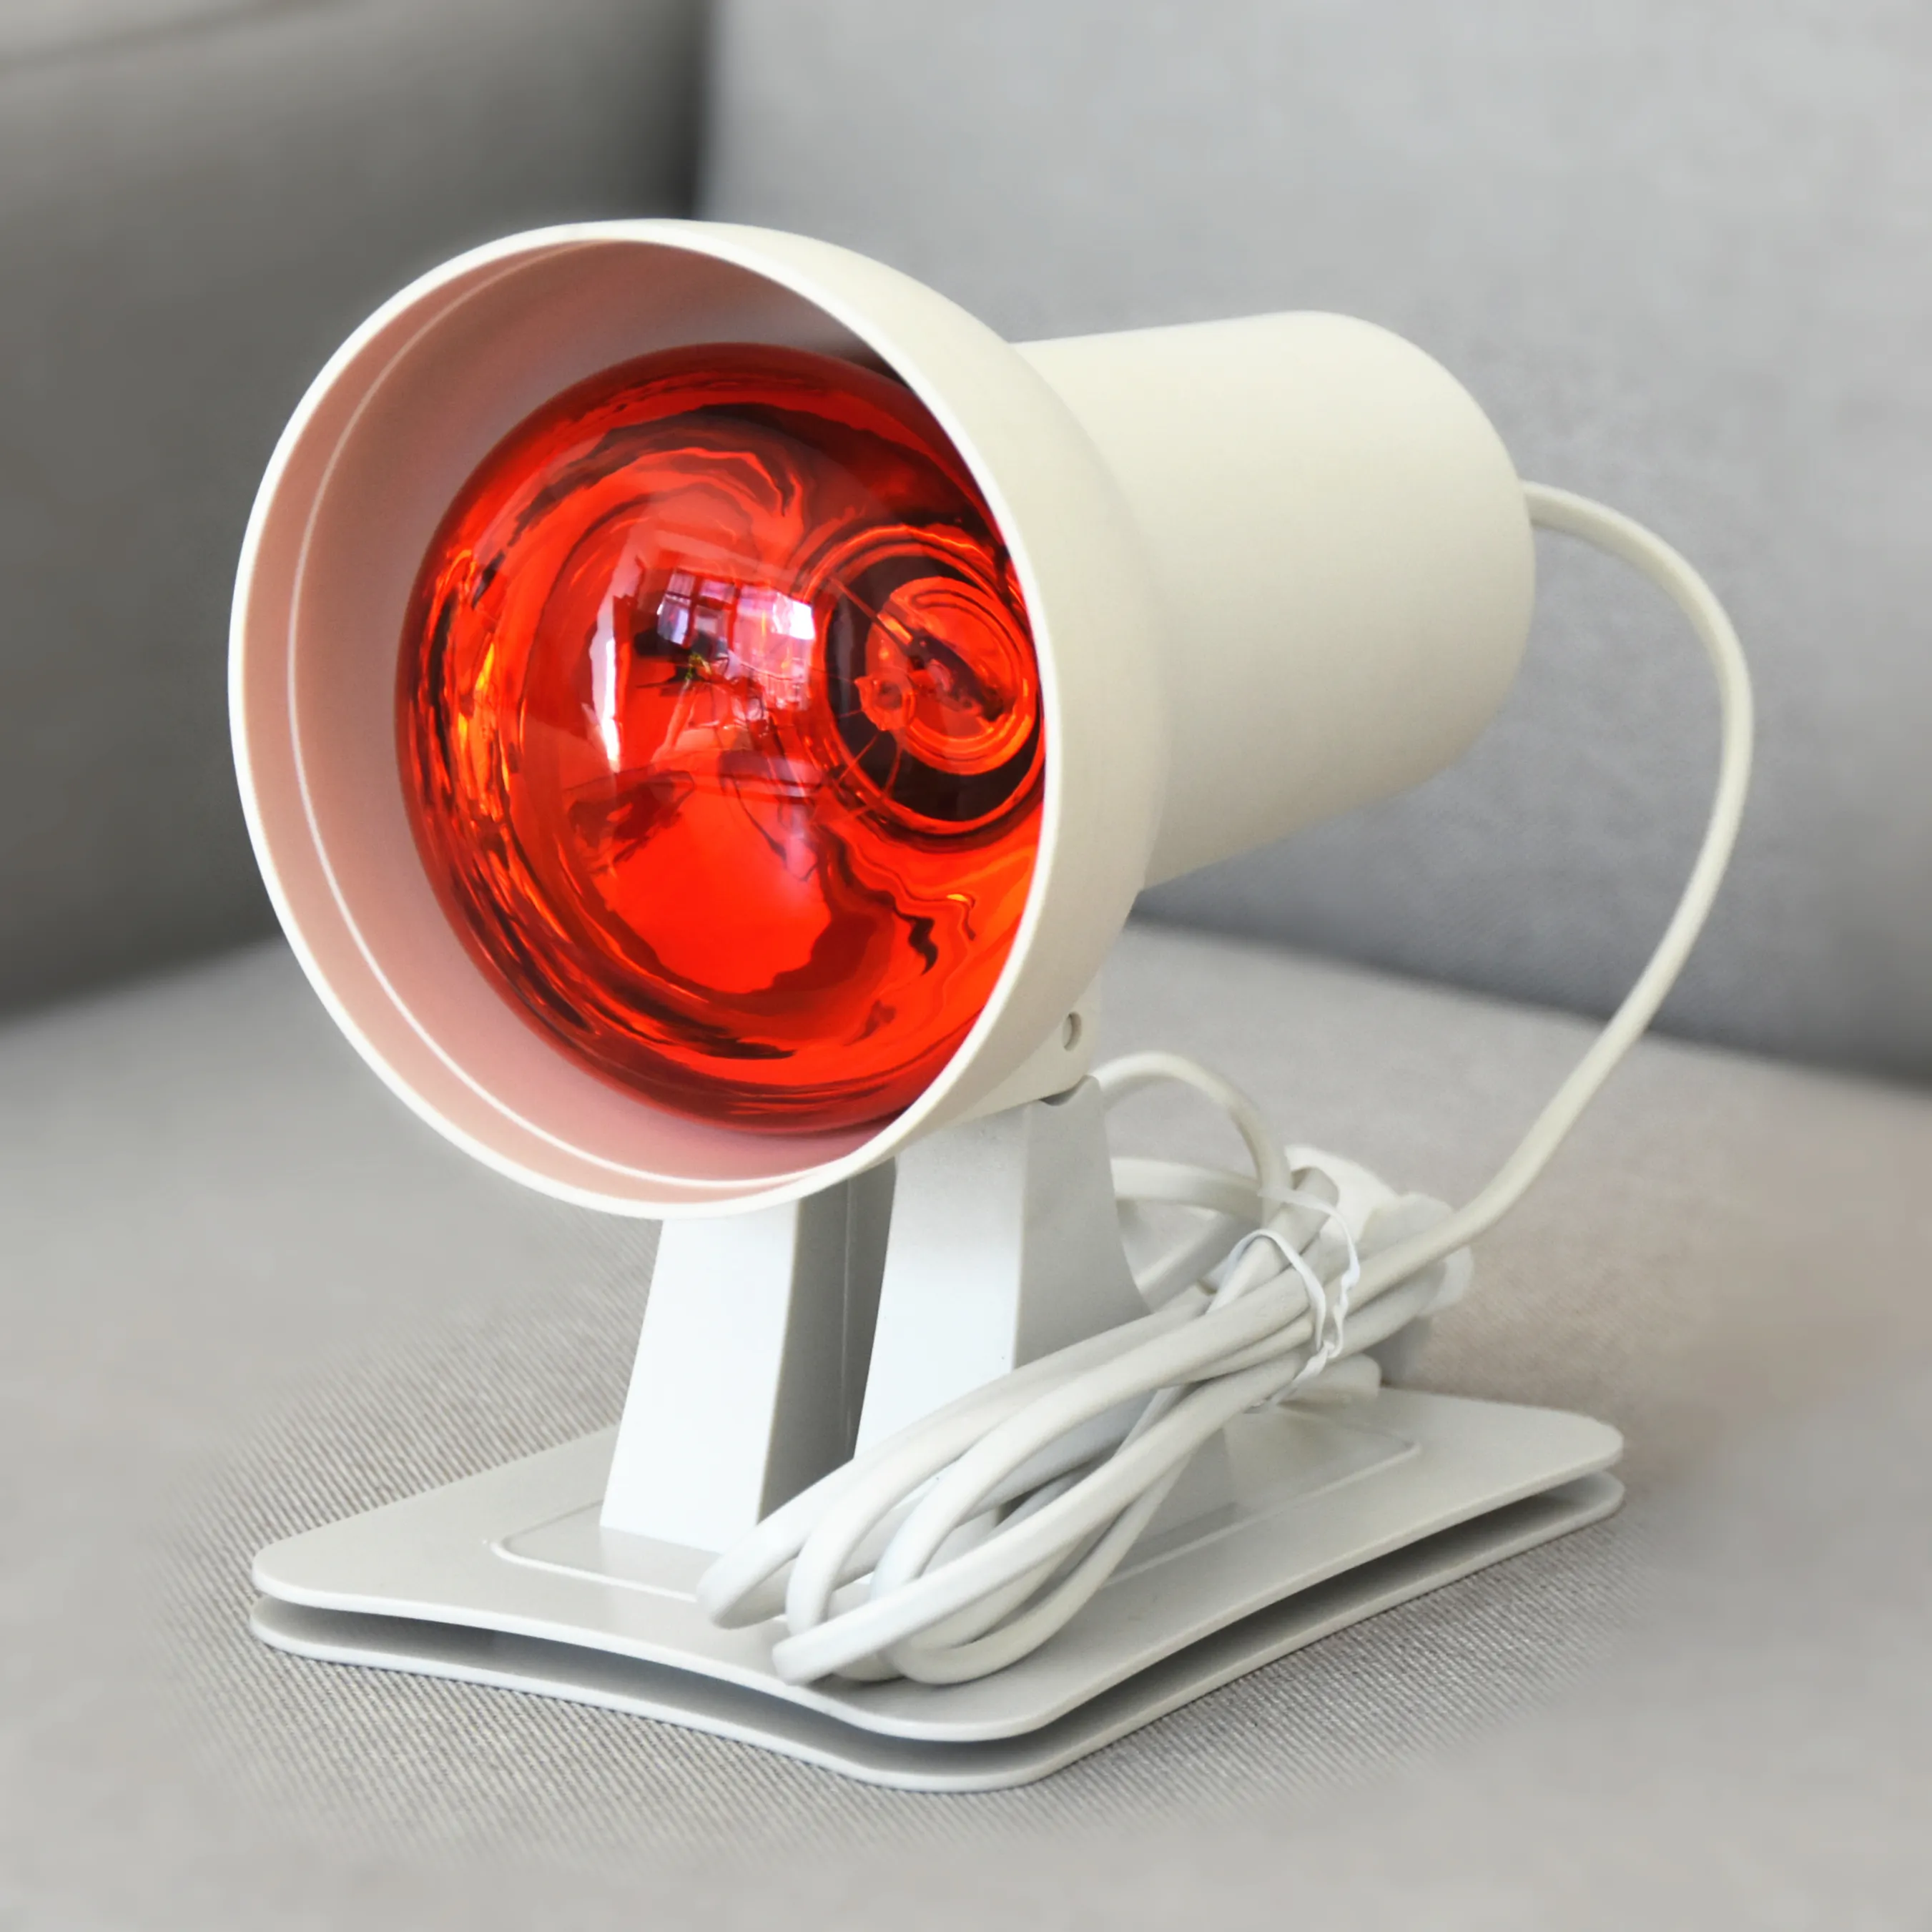 Infrared Lamp Prices Competitive Price Custom Infra Red Heating Emitter Near Halogen Infrared Lamp